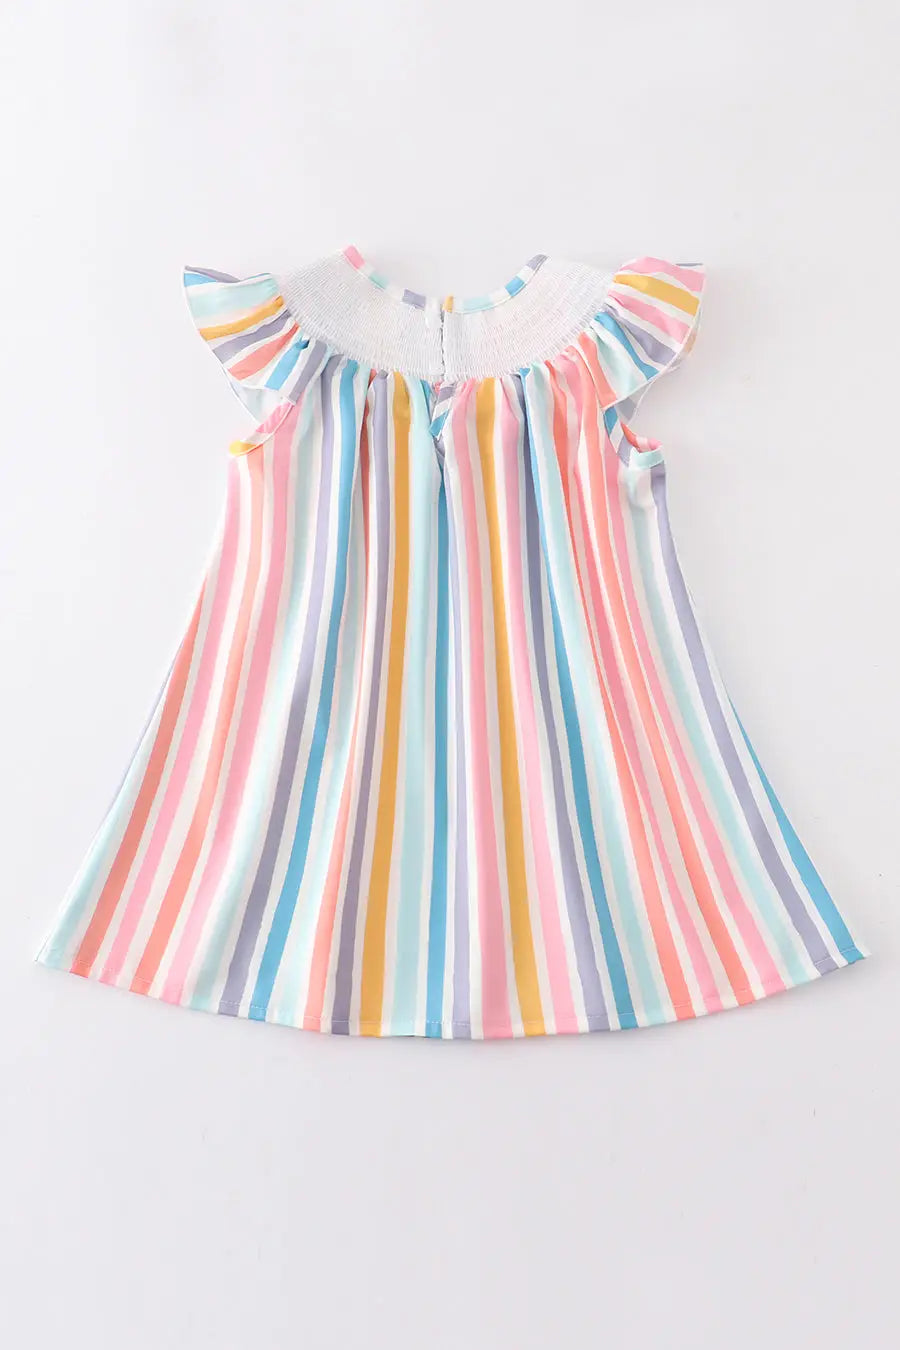 A Honeydew Multicolored Stripe Orange Peach Smocked Dress for a baby girl.